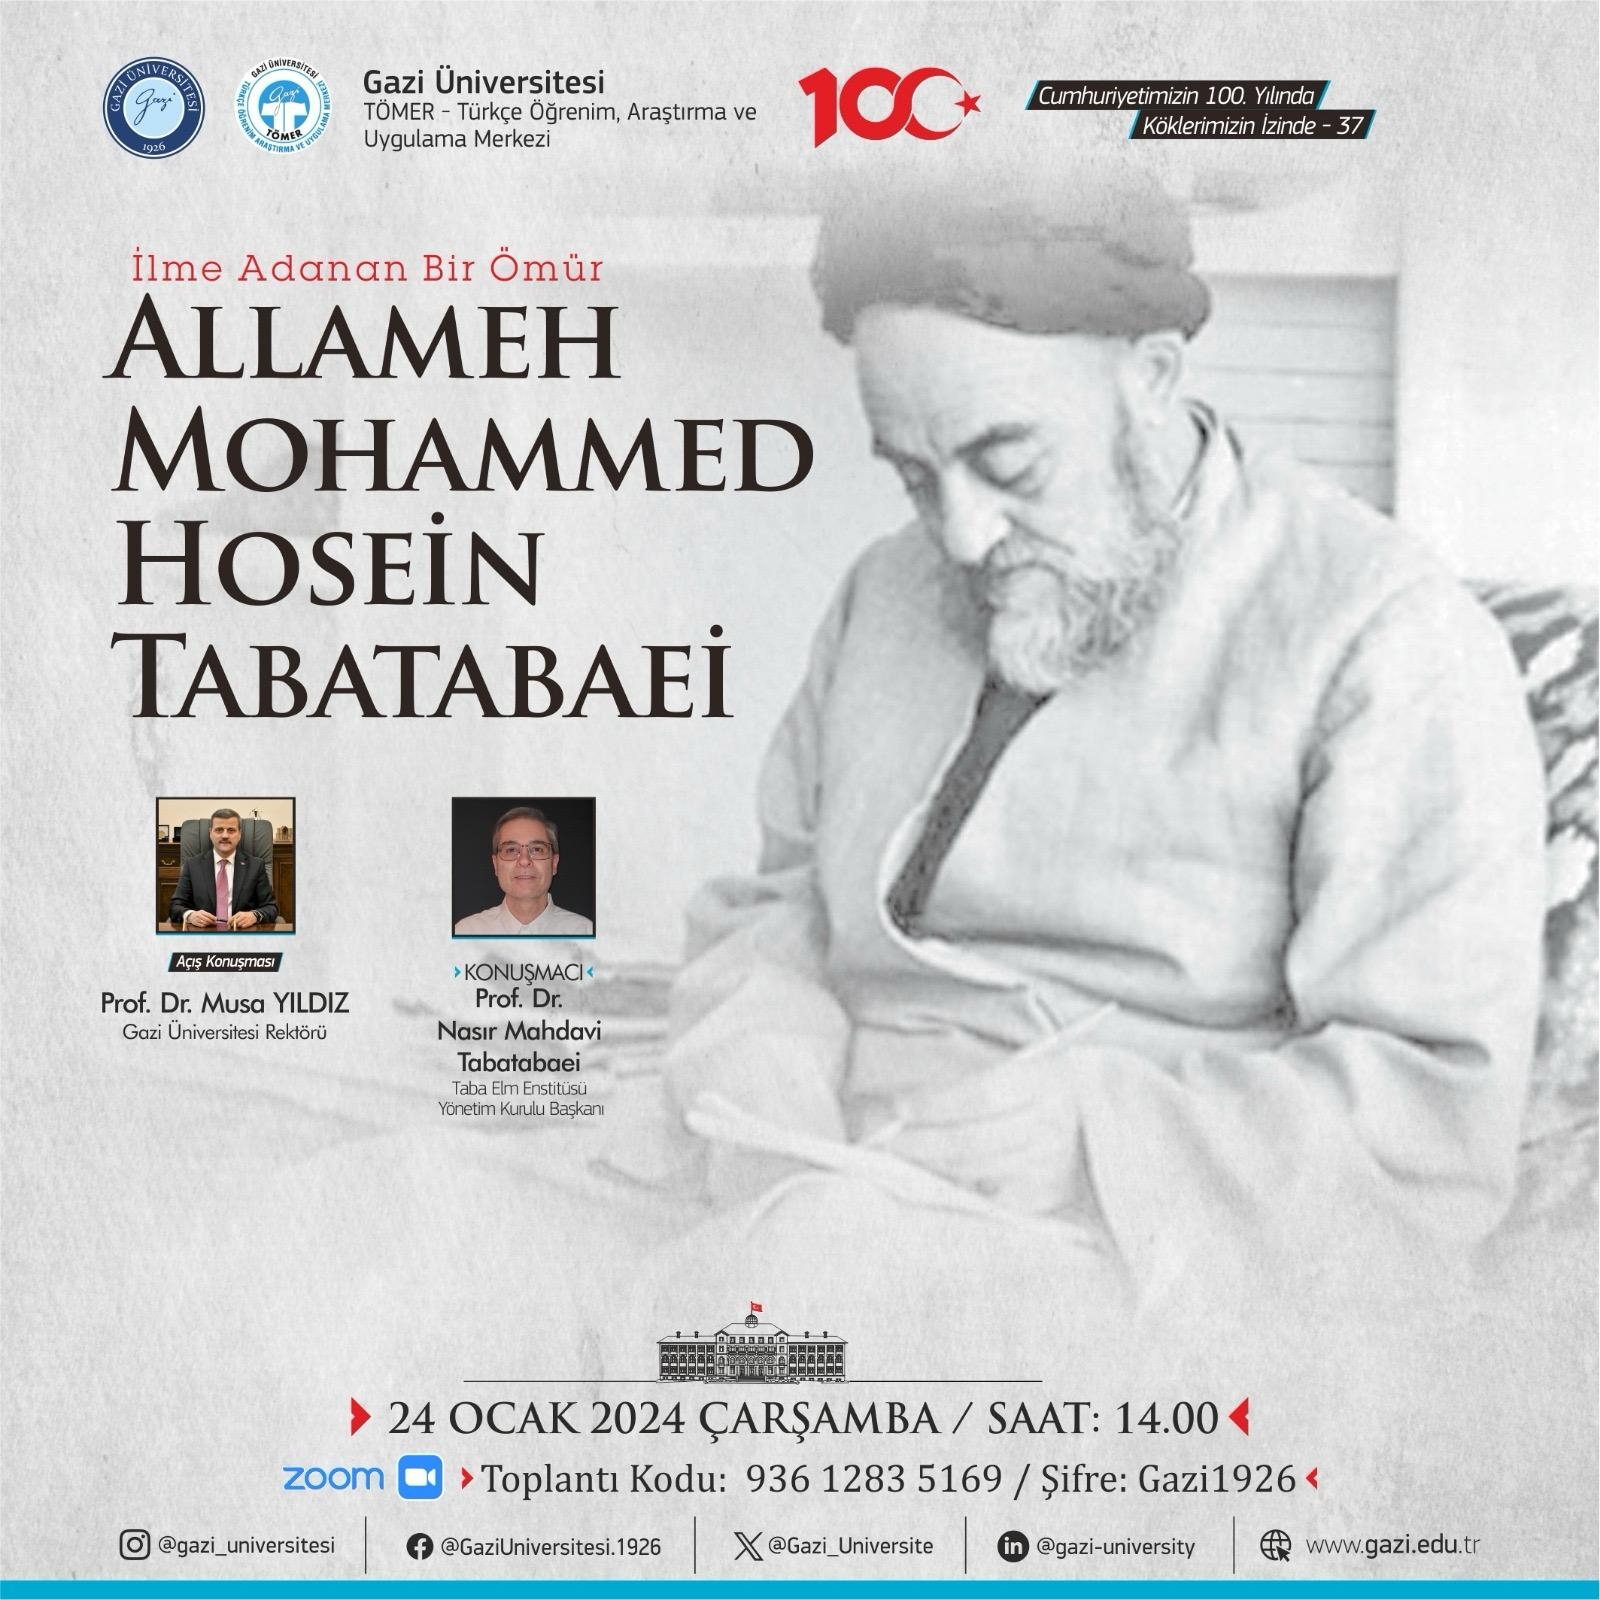 On Following Our Roots-37: ALLAMEH MOHAMMED HOSEİN TABATABAEİ-1